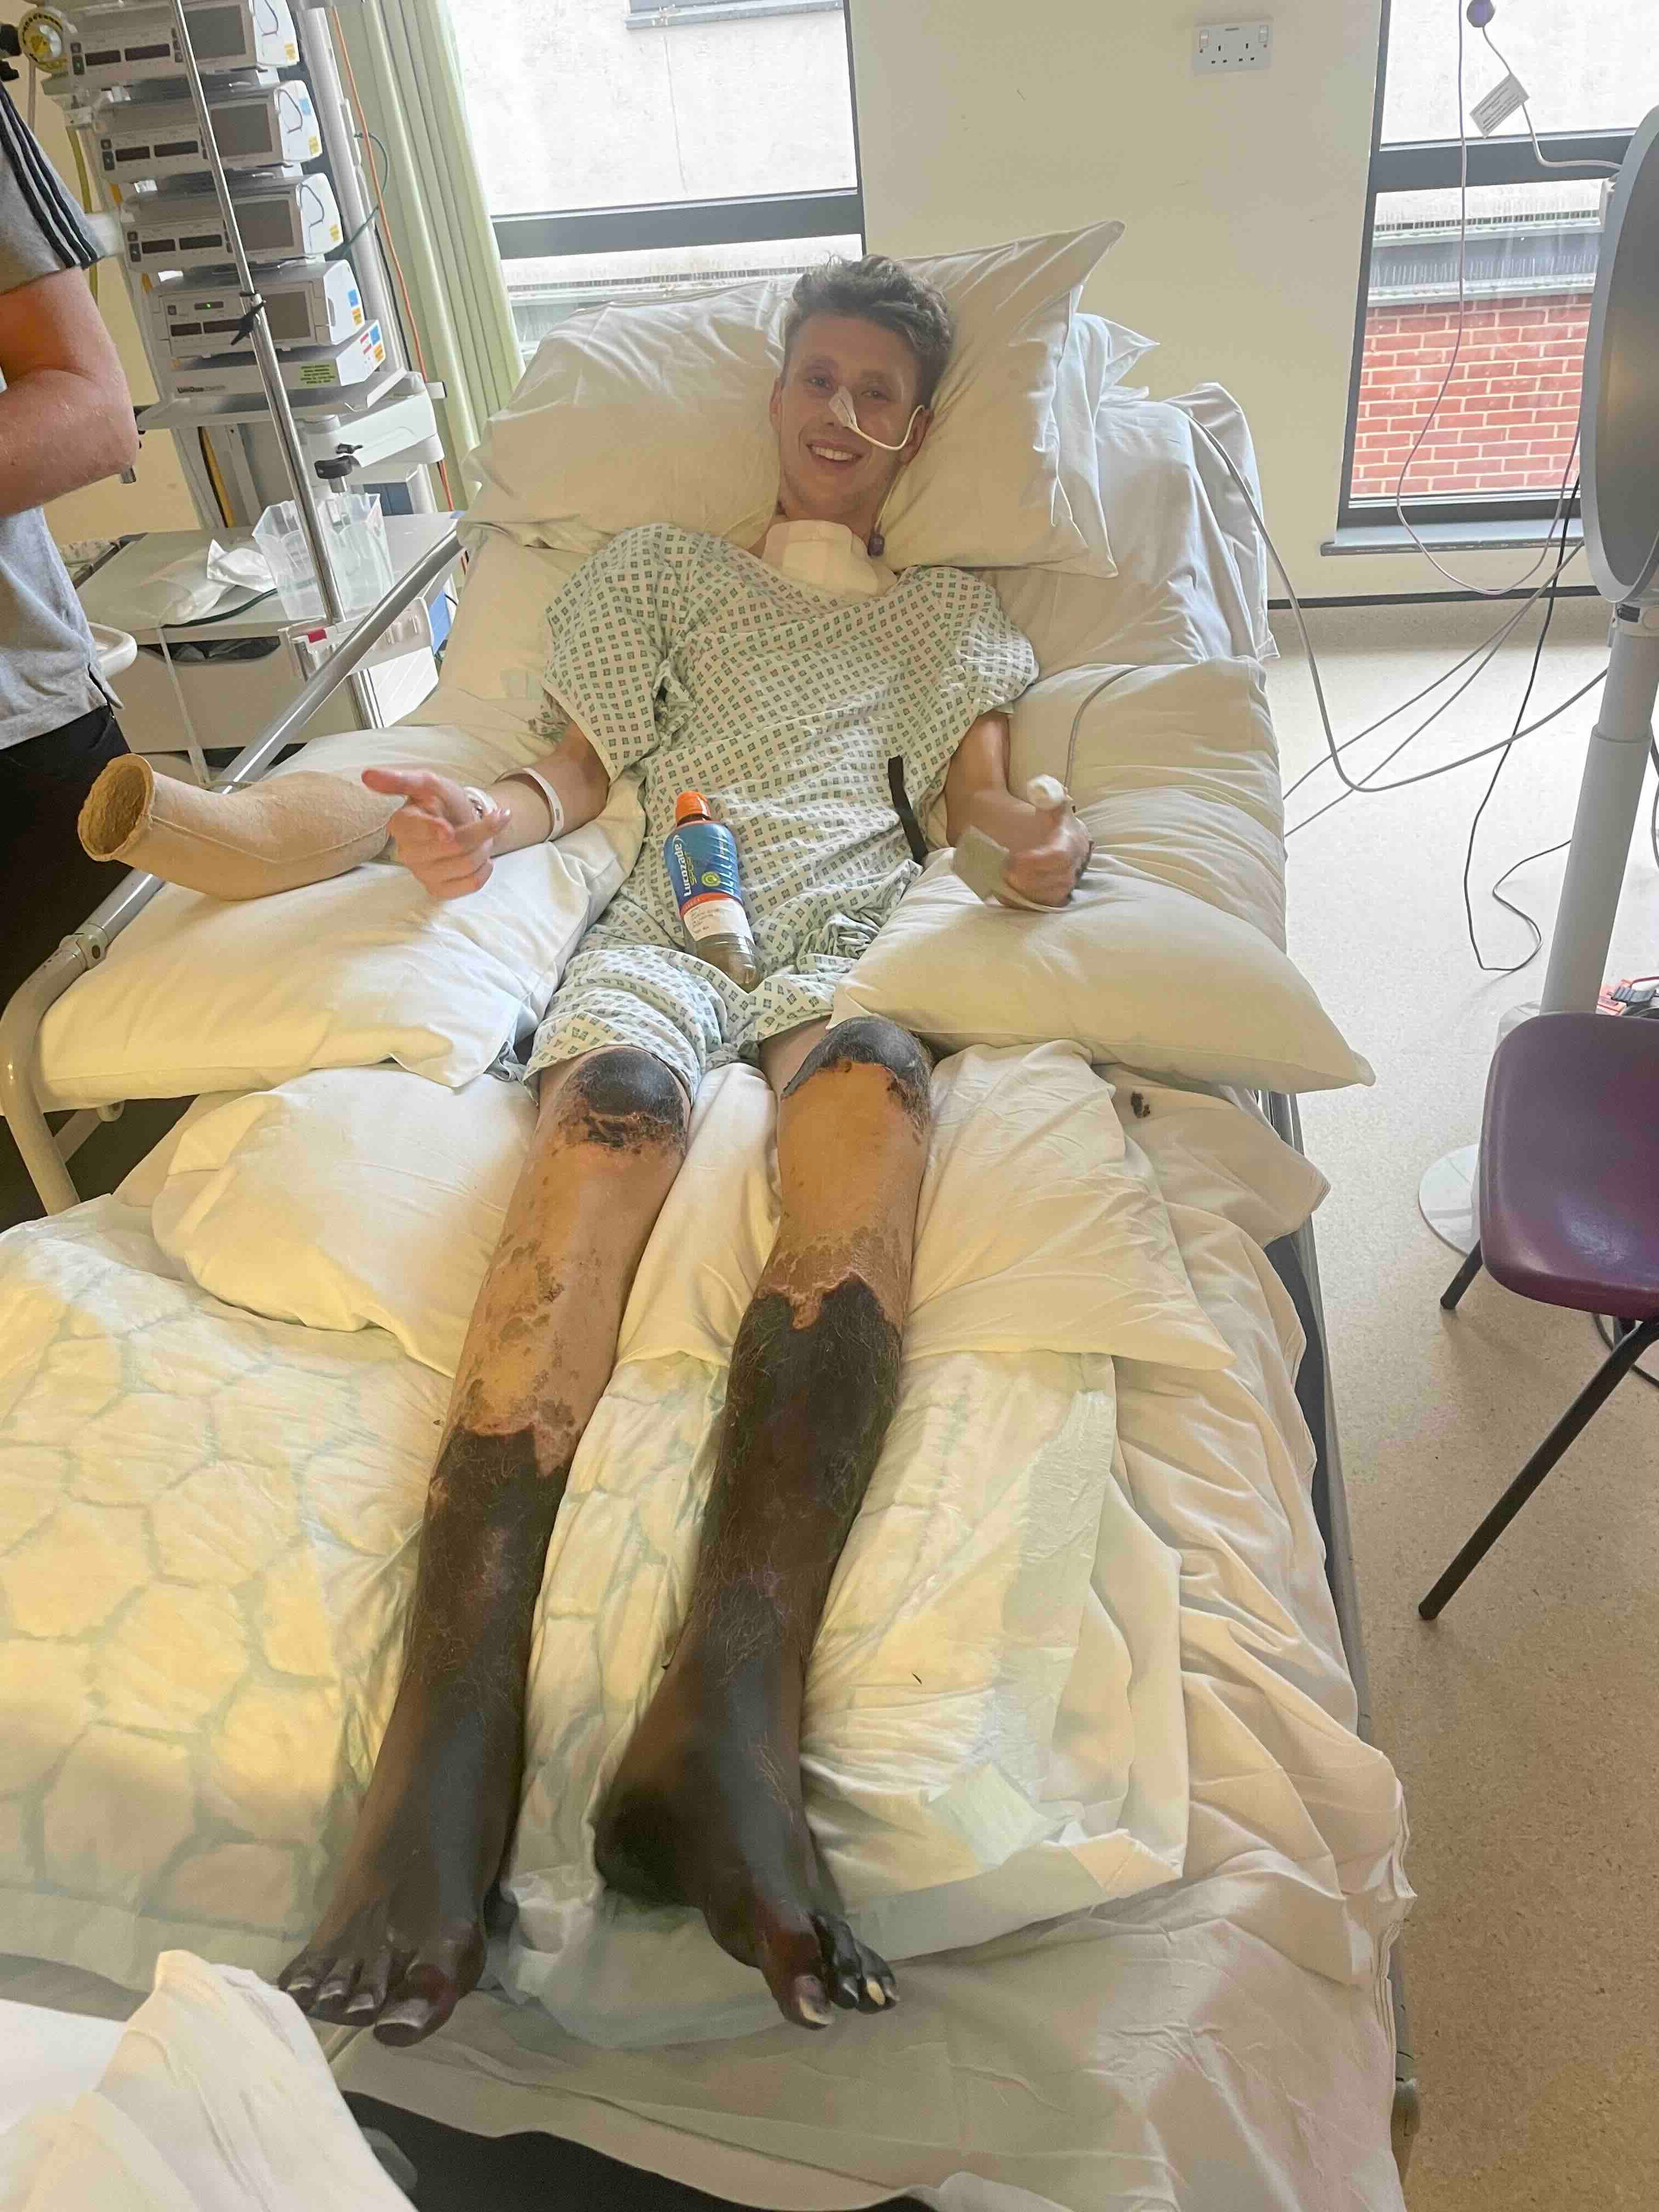 Footballer who went to hospital with flu symptoms has legs amputated after sepsis The Independent